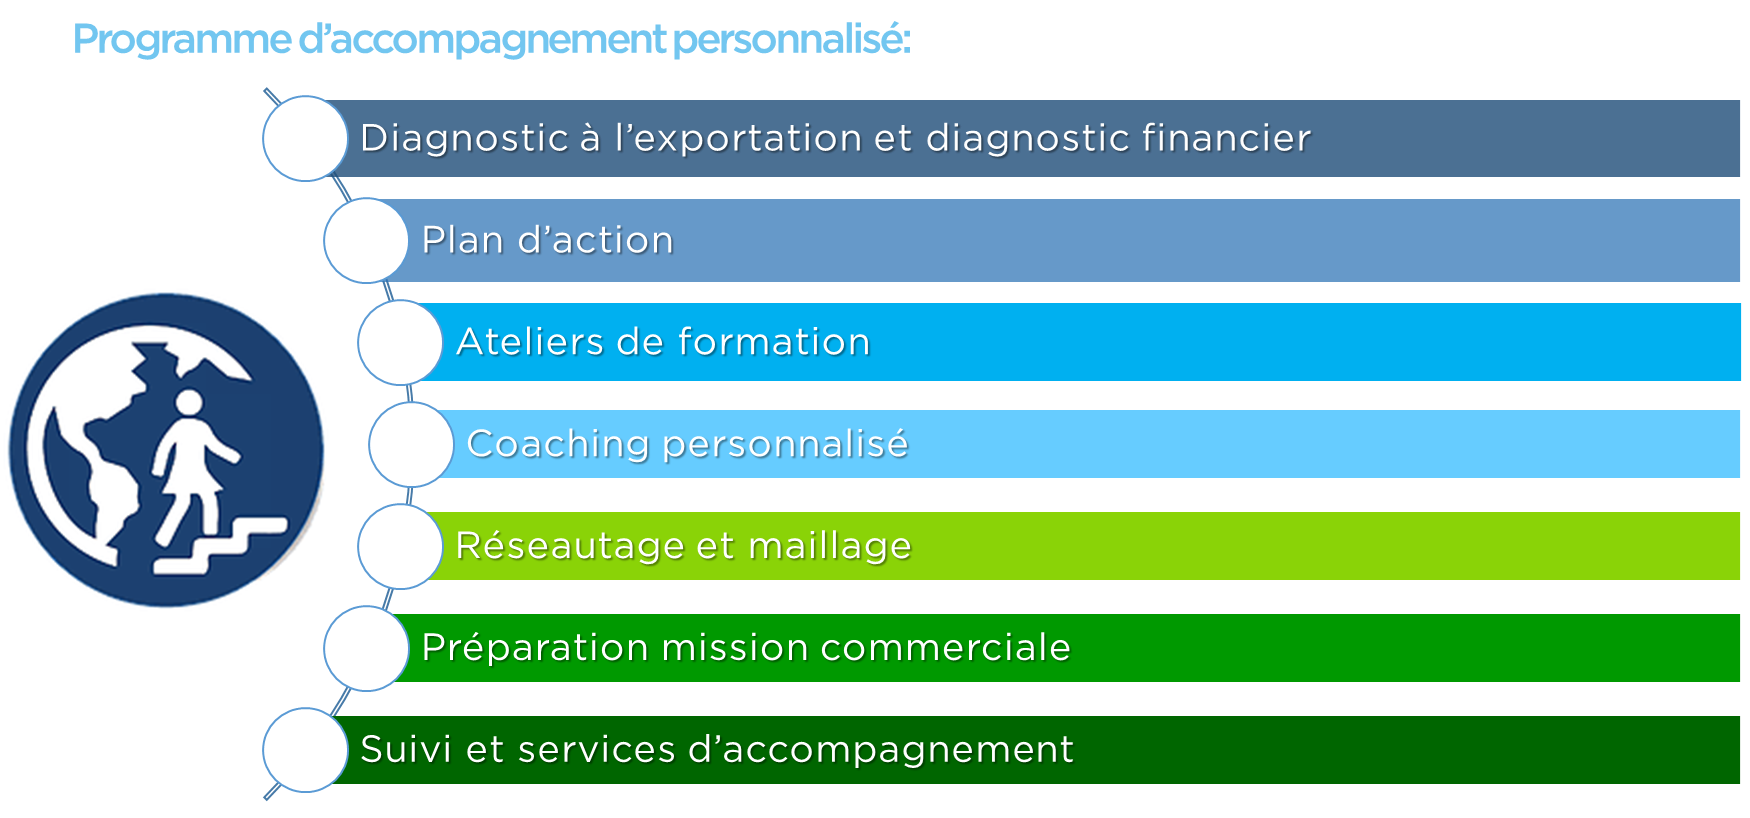 Programme d'accompagnement